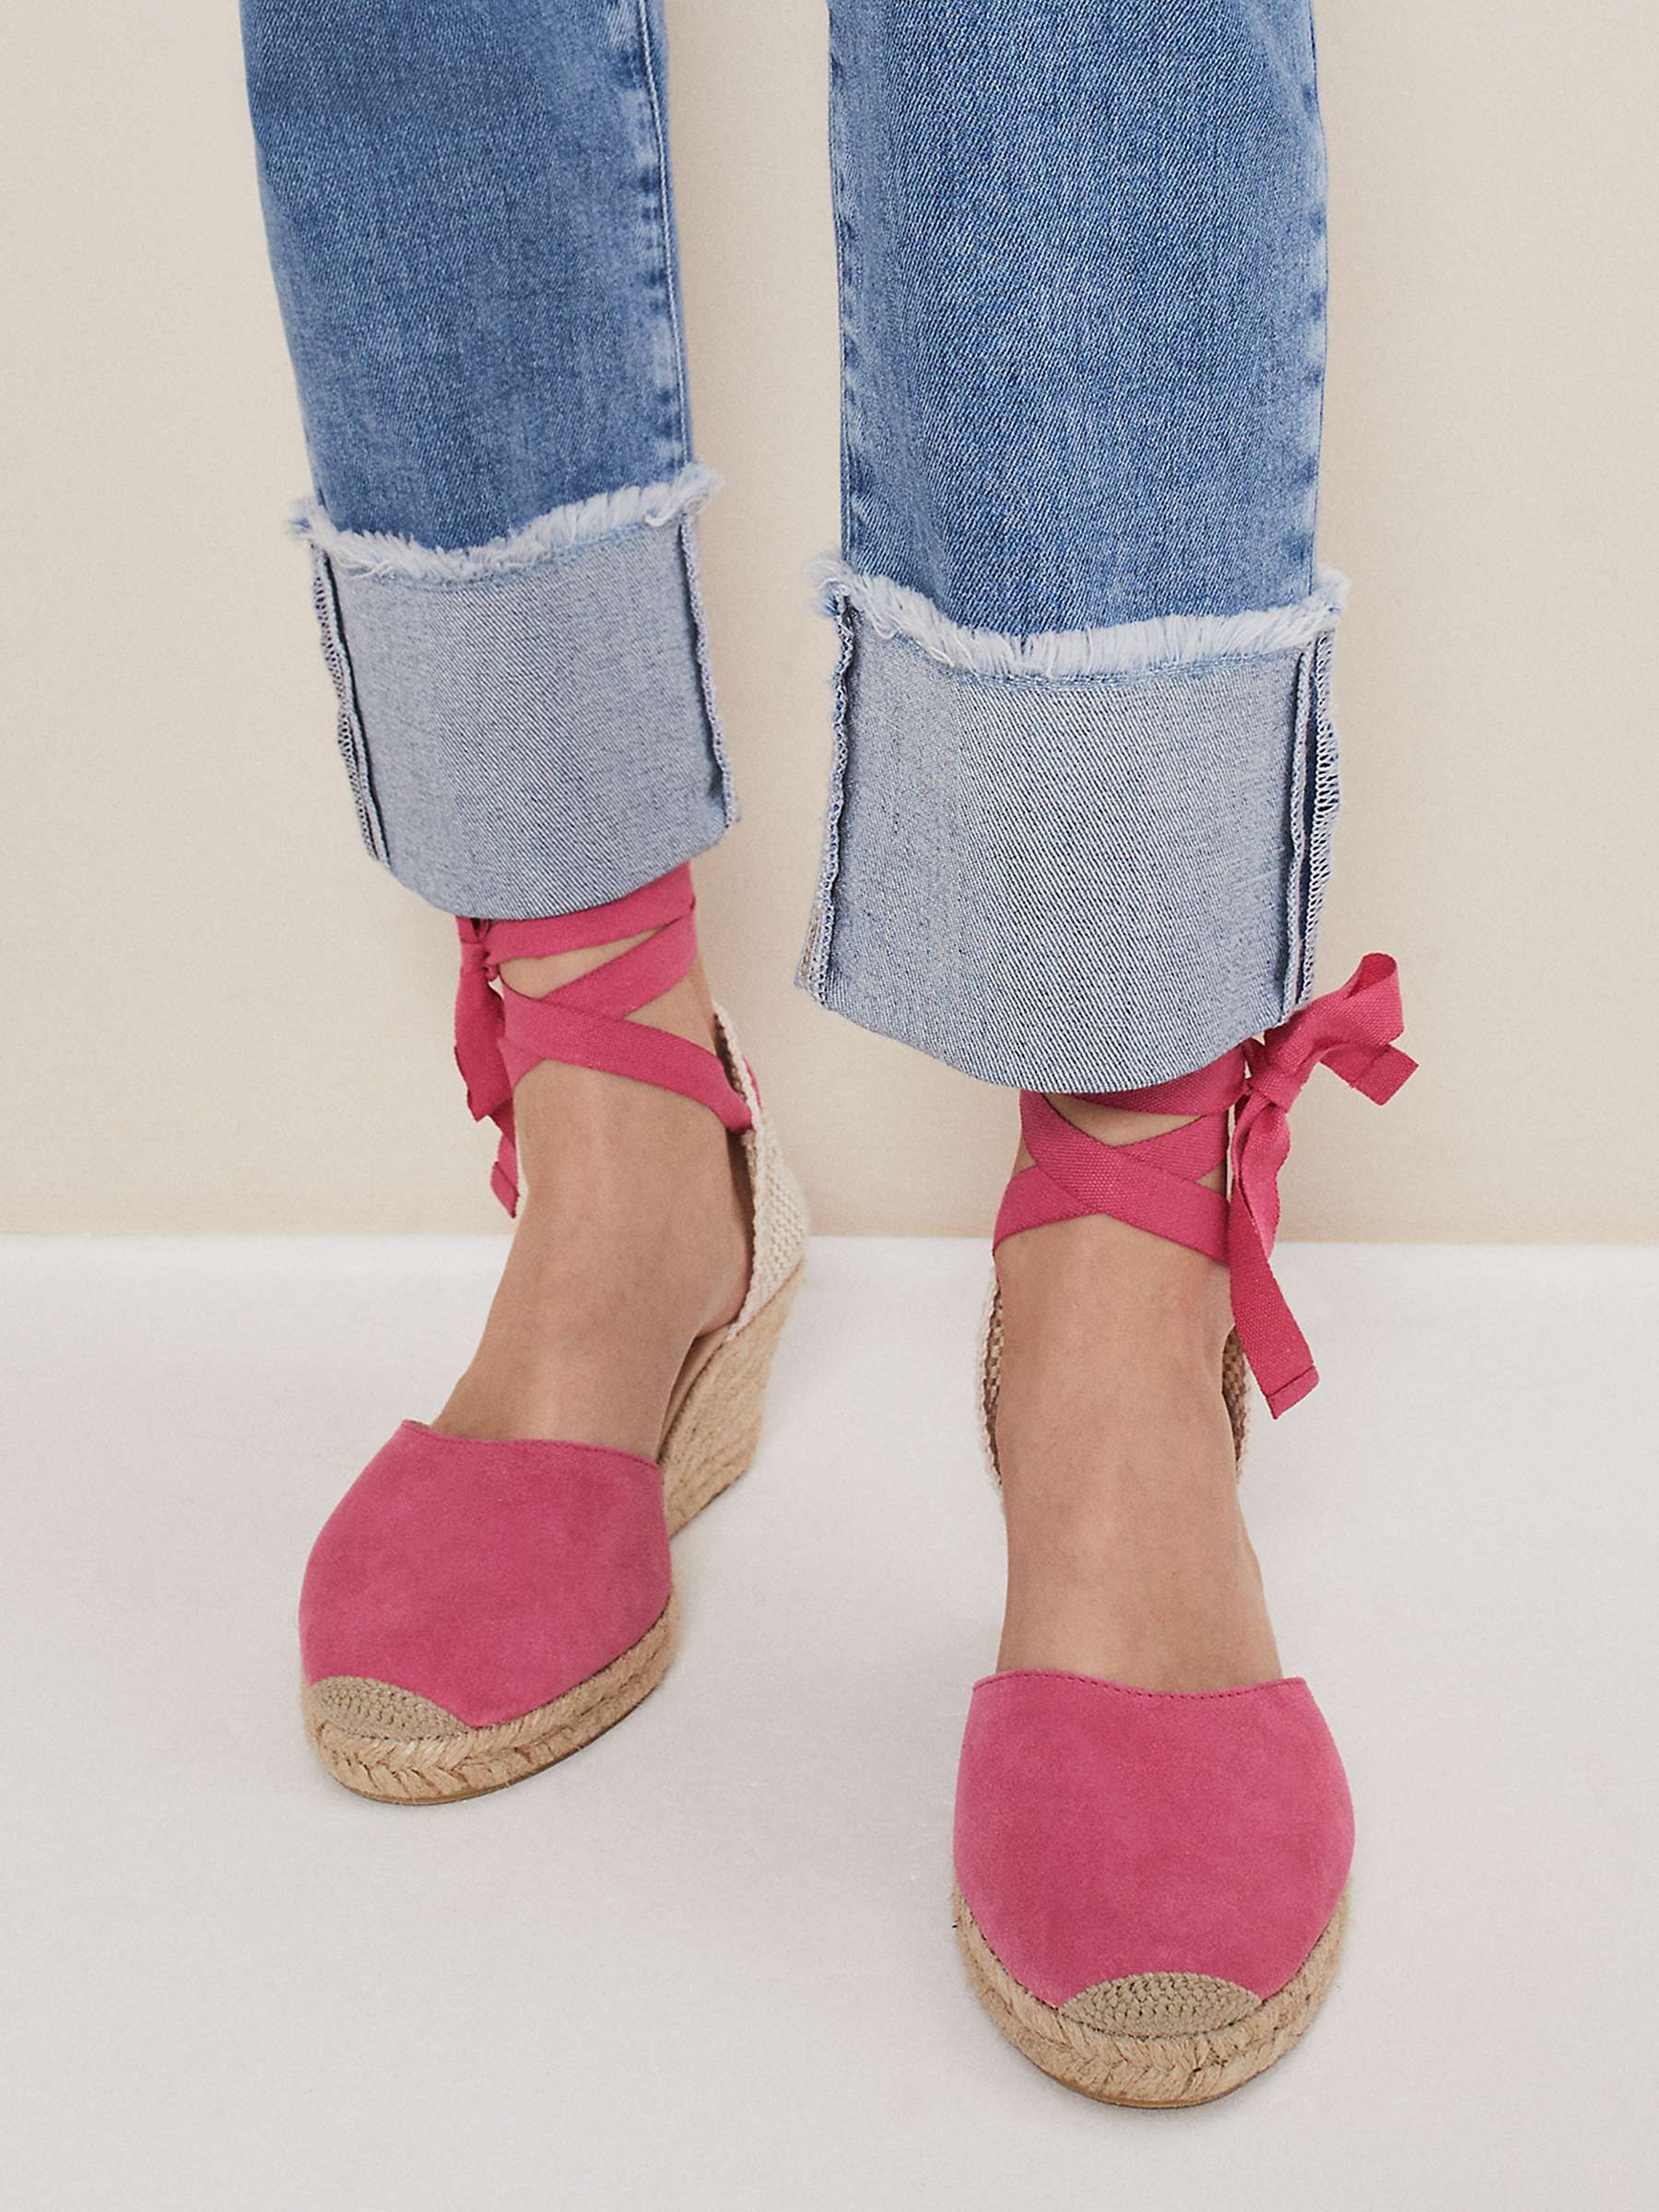 Buy Phase Eight Suede Ankle Tie Espadrilles, Bright Pink Online at johnlewis.com